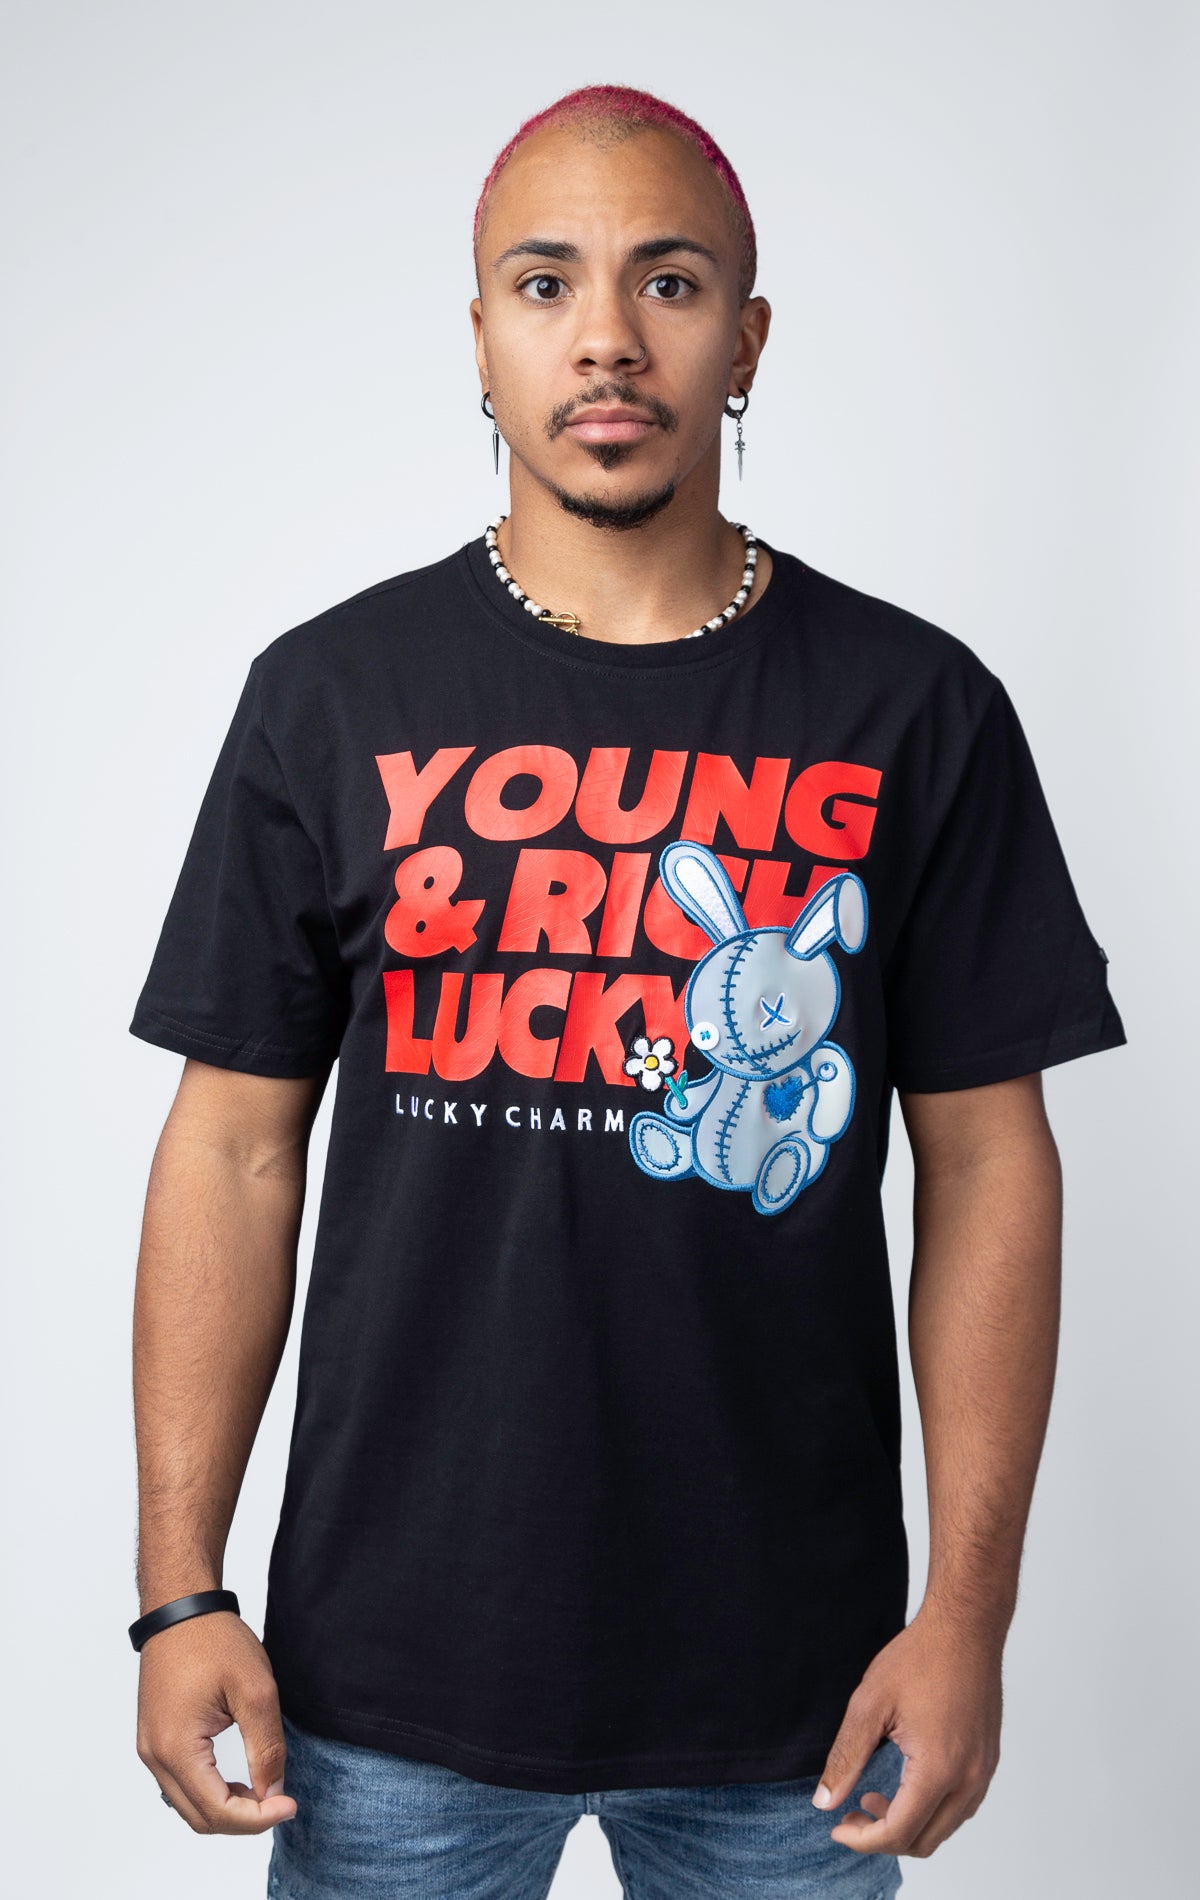 Stylish black T-shirt featuring a motivational 'Young, Rich, and Lucky' slogan